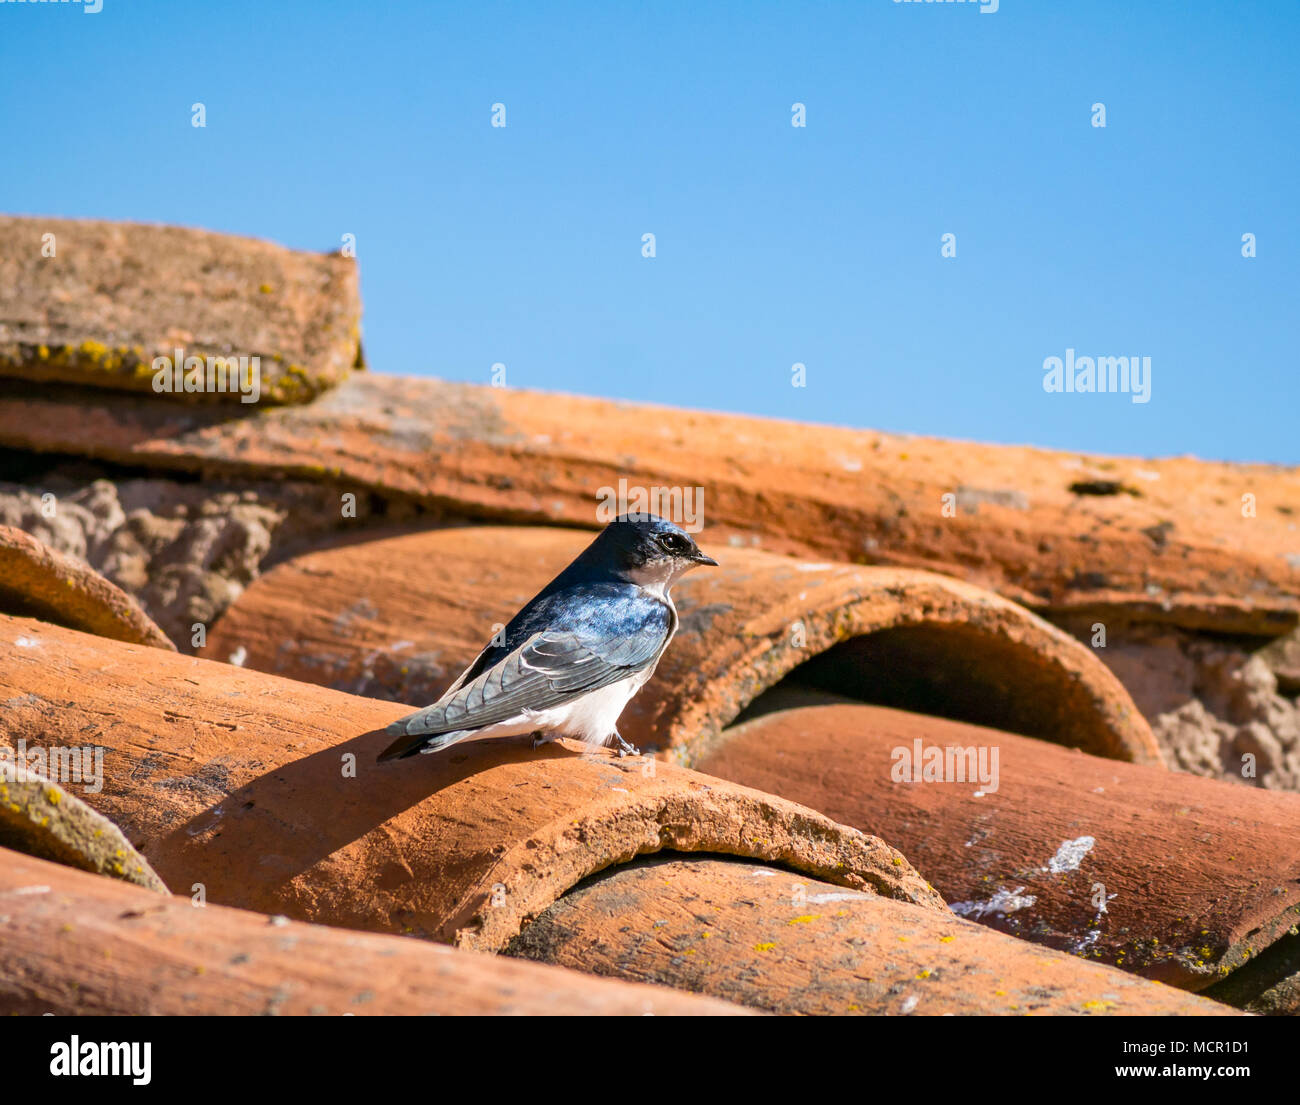 Chilean swallow, Tachycineta leucopyga, resting on tiled roof with blue sky, Chile, South America Stock Photo